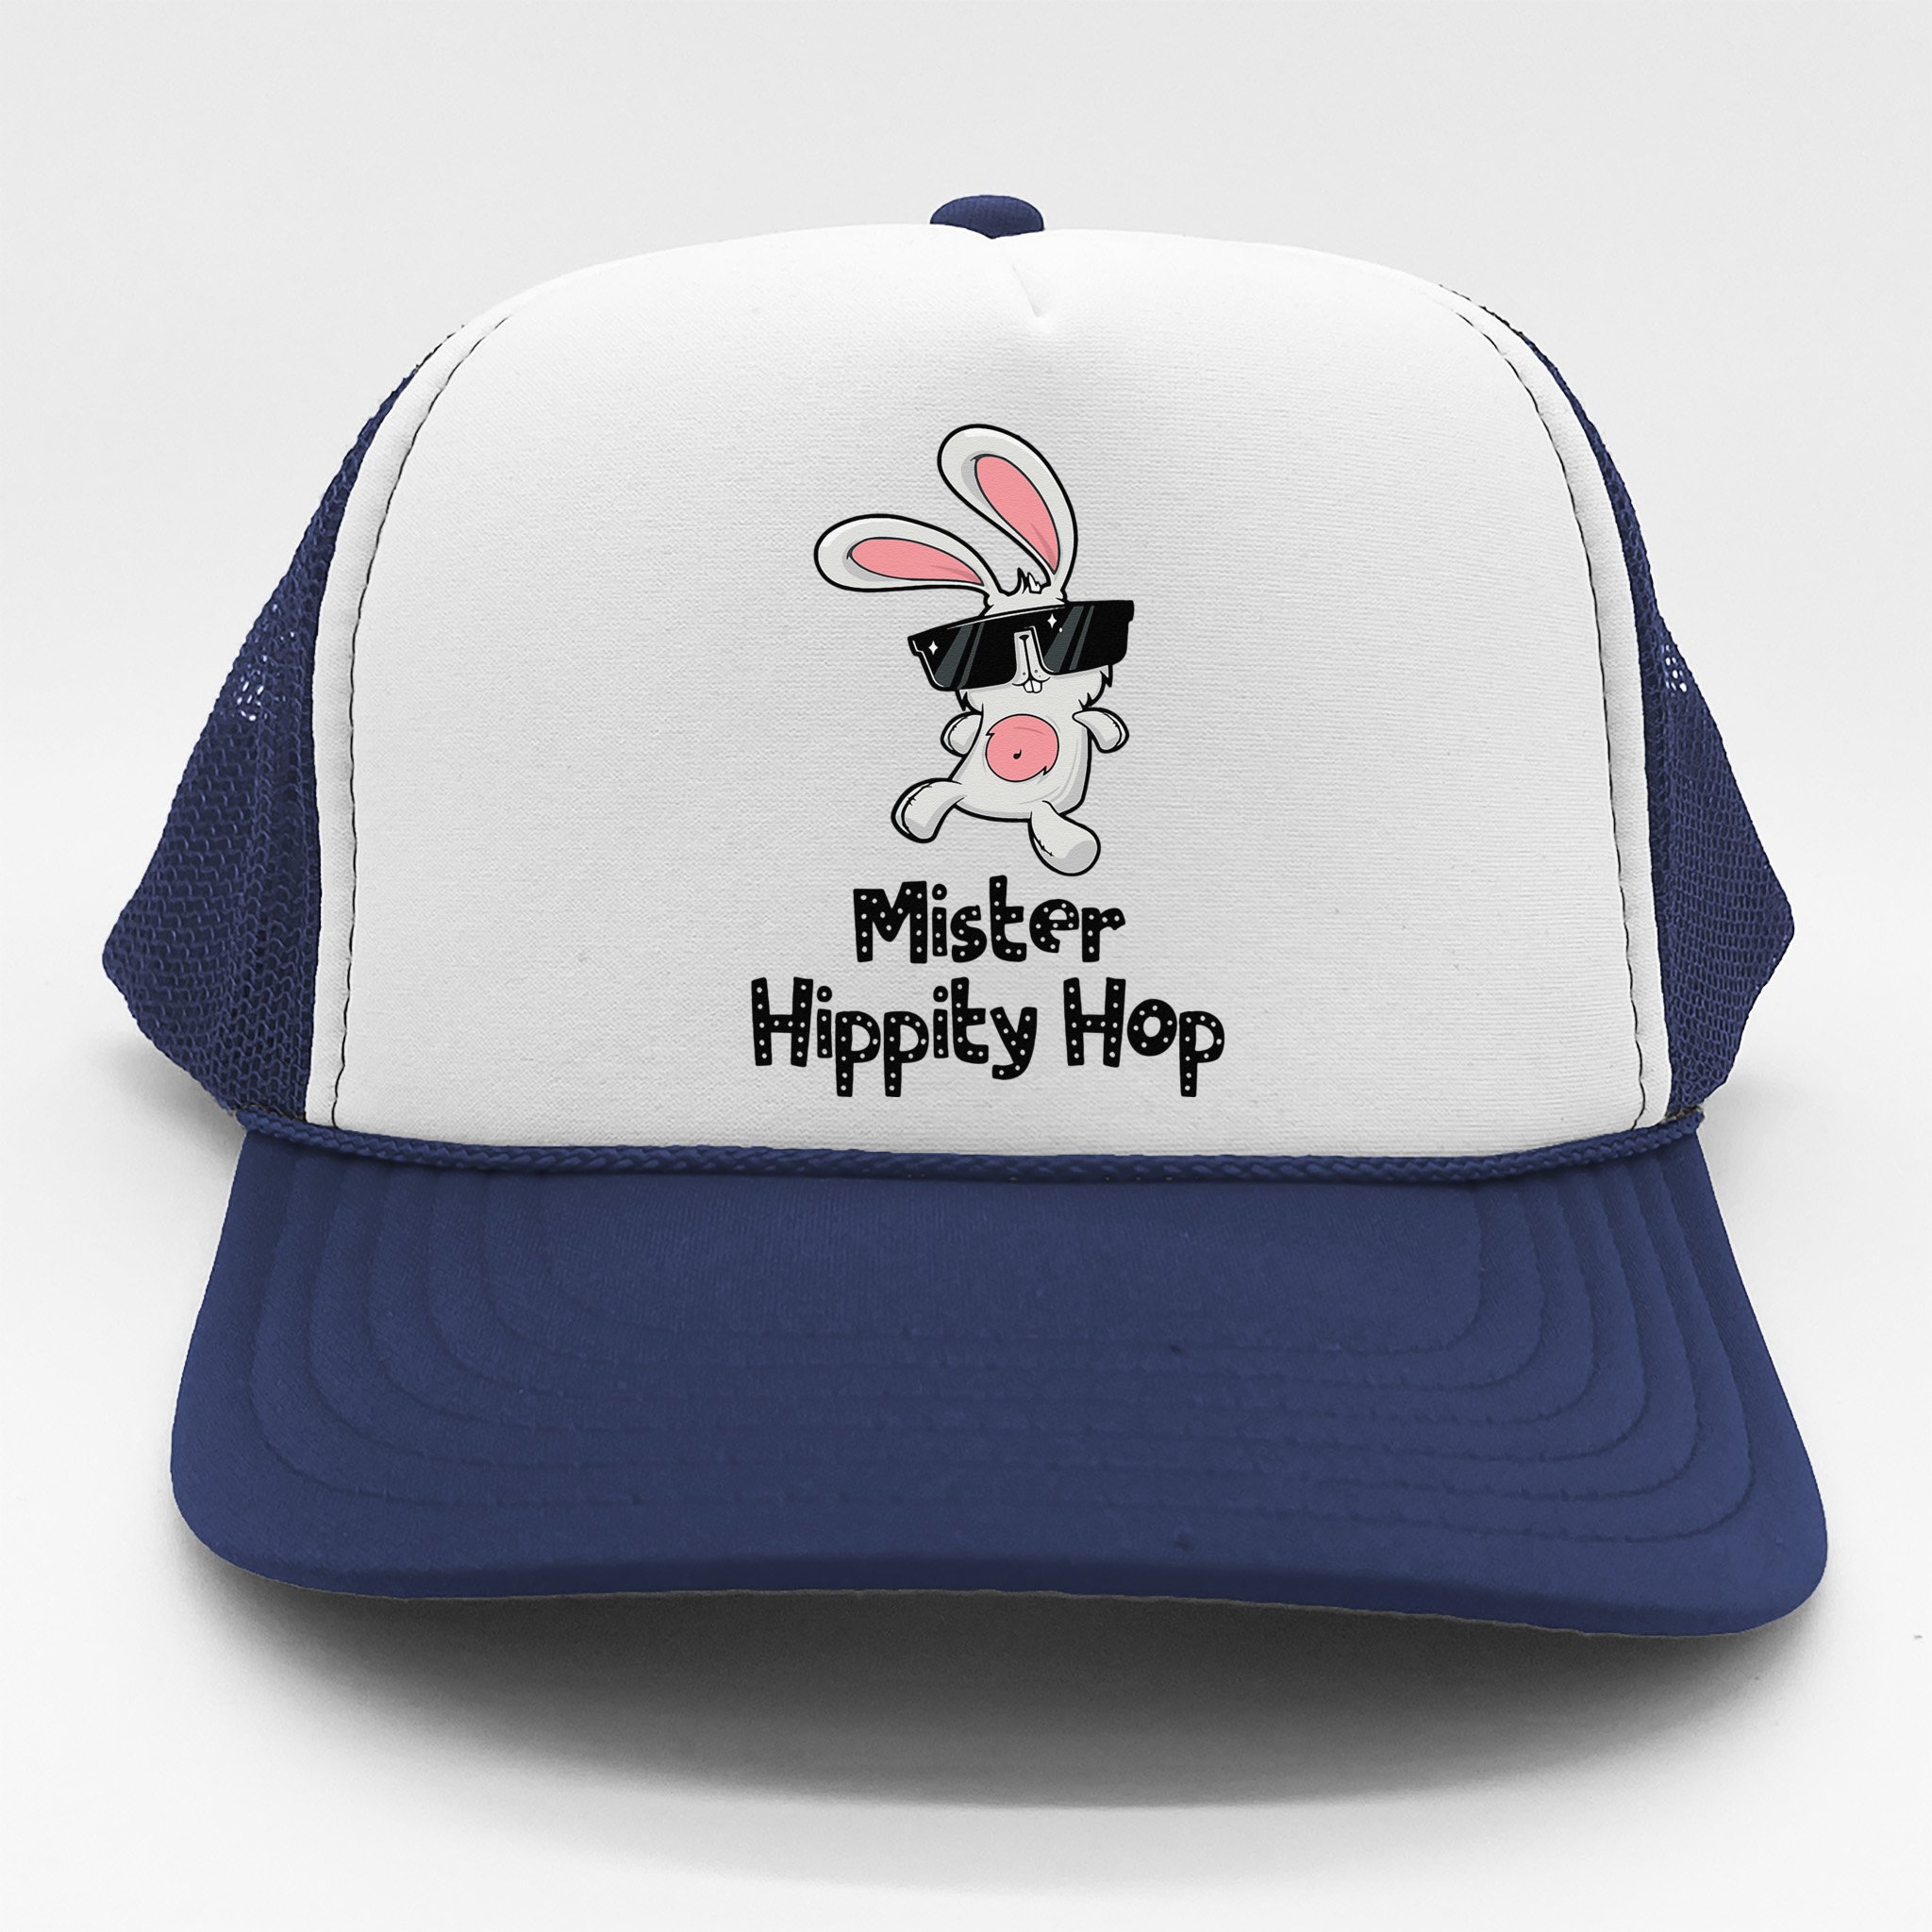 https://images3.teeshirtpalace.com/images/productImages/mhh5996203-mister-hippity-hop-hip-hop-bunny-funny-easter--navy-th-garment.jpg